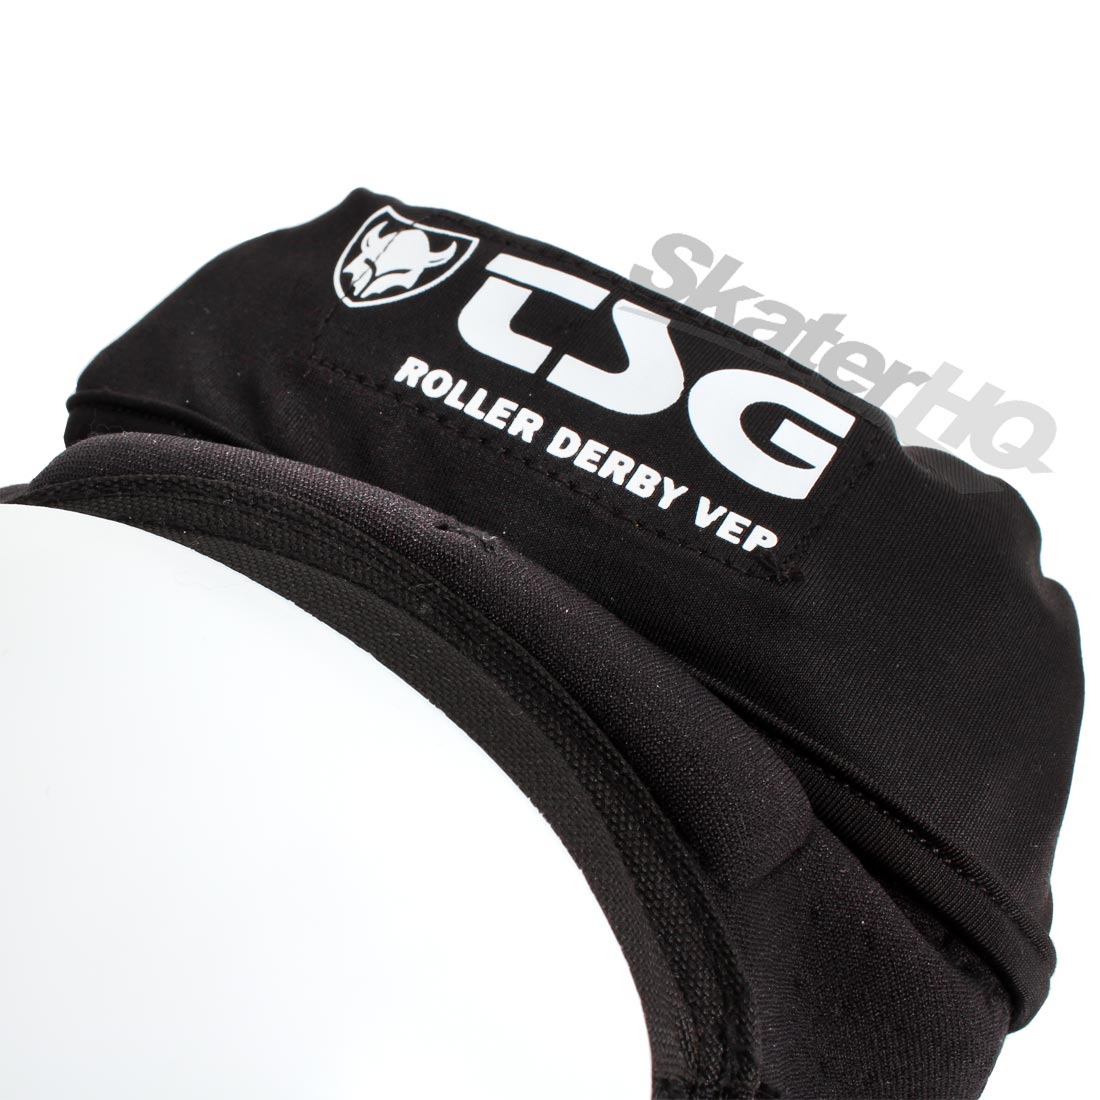 TSG D30 Rollerderby Knee - XLarge Protective Gear